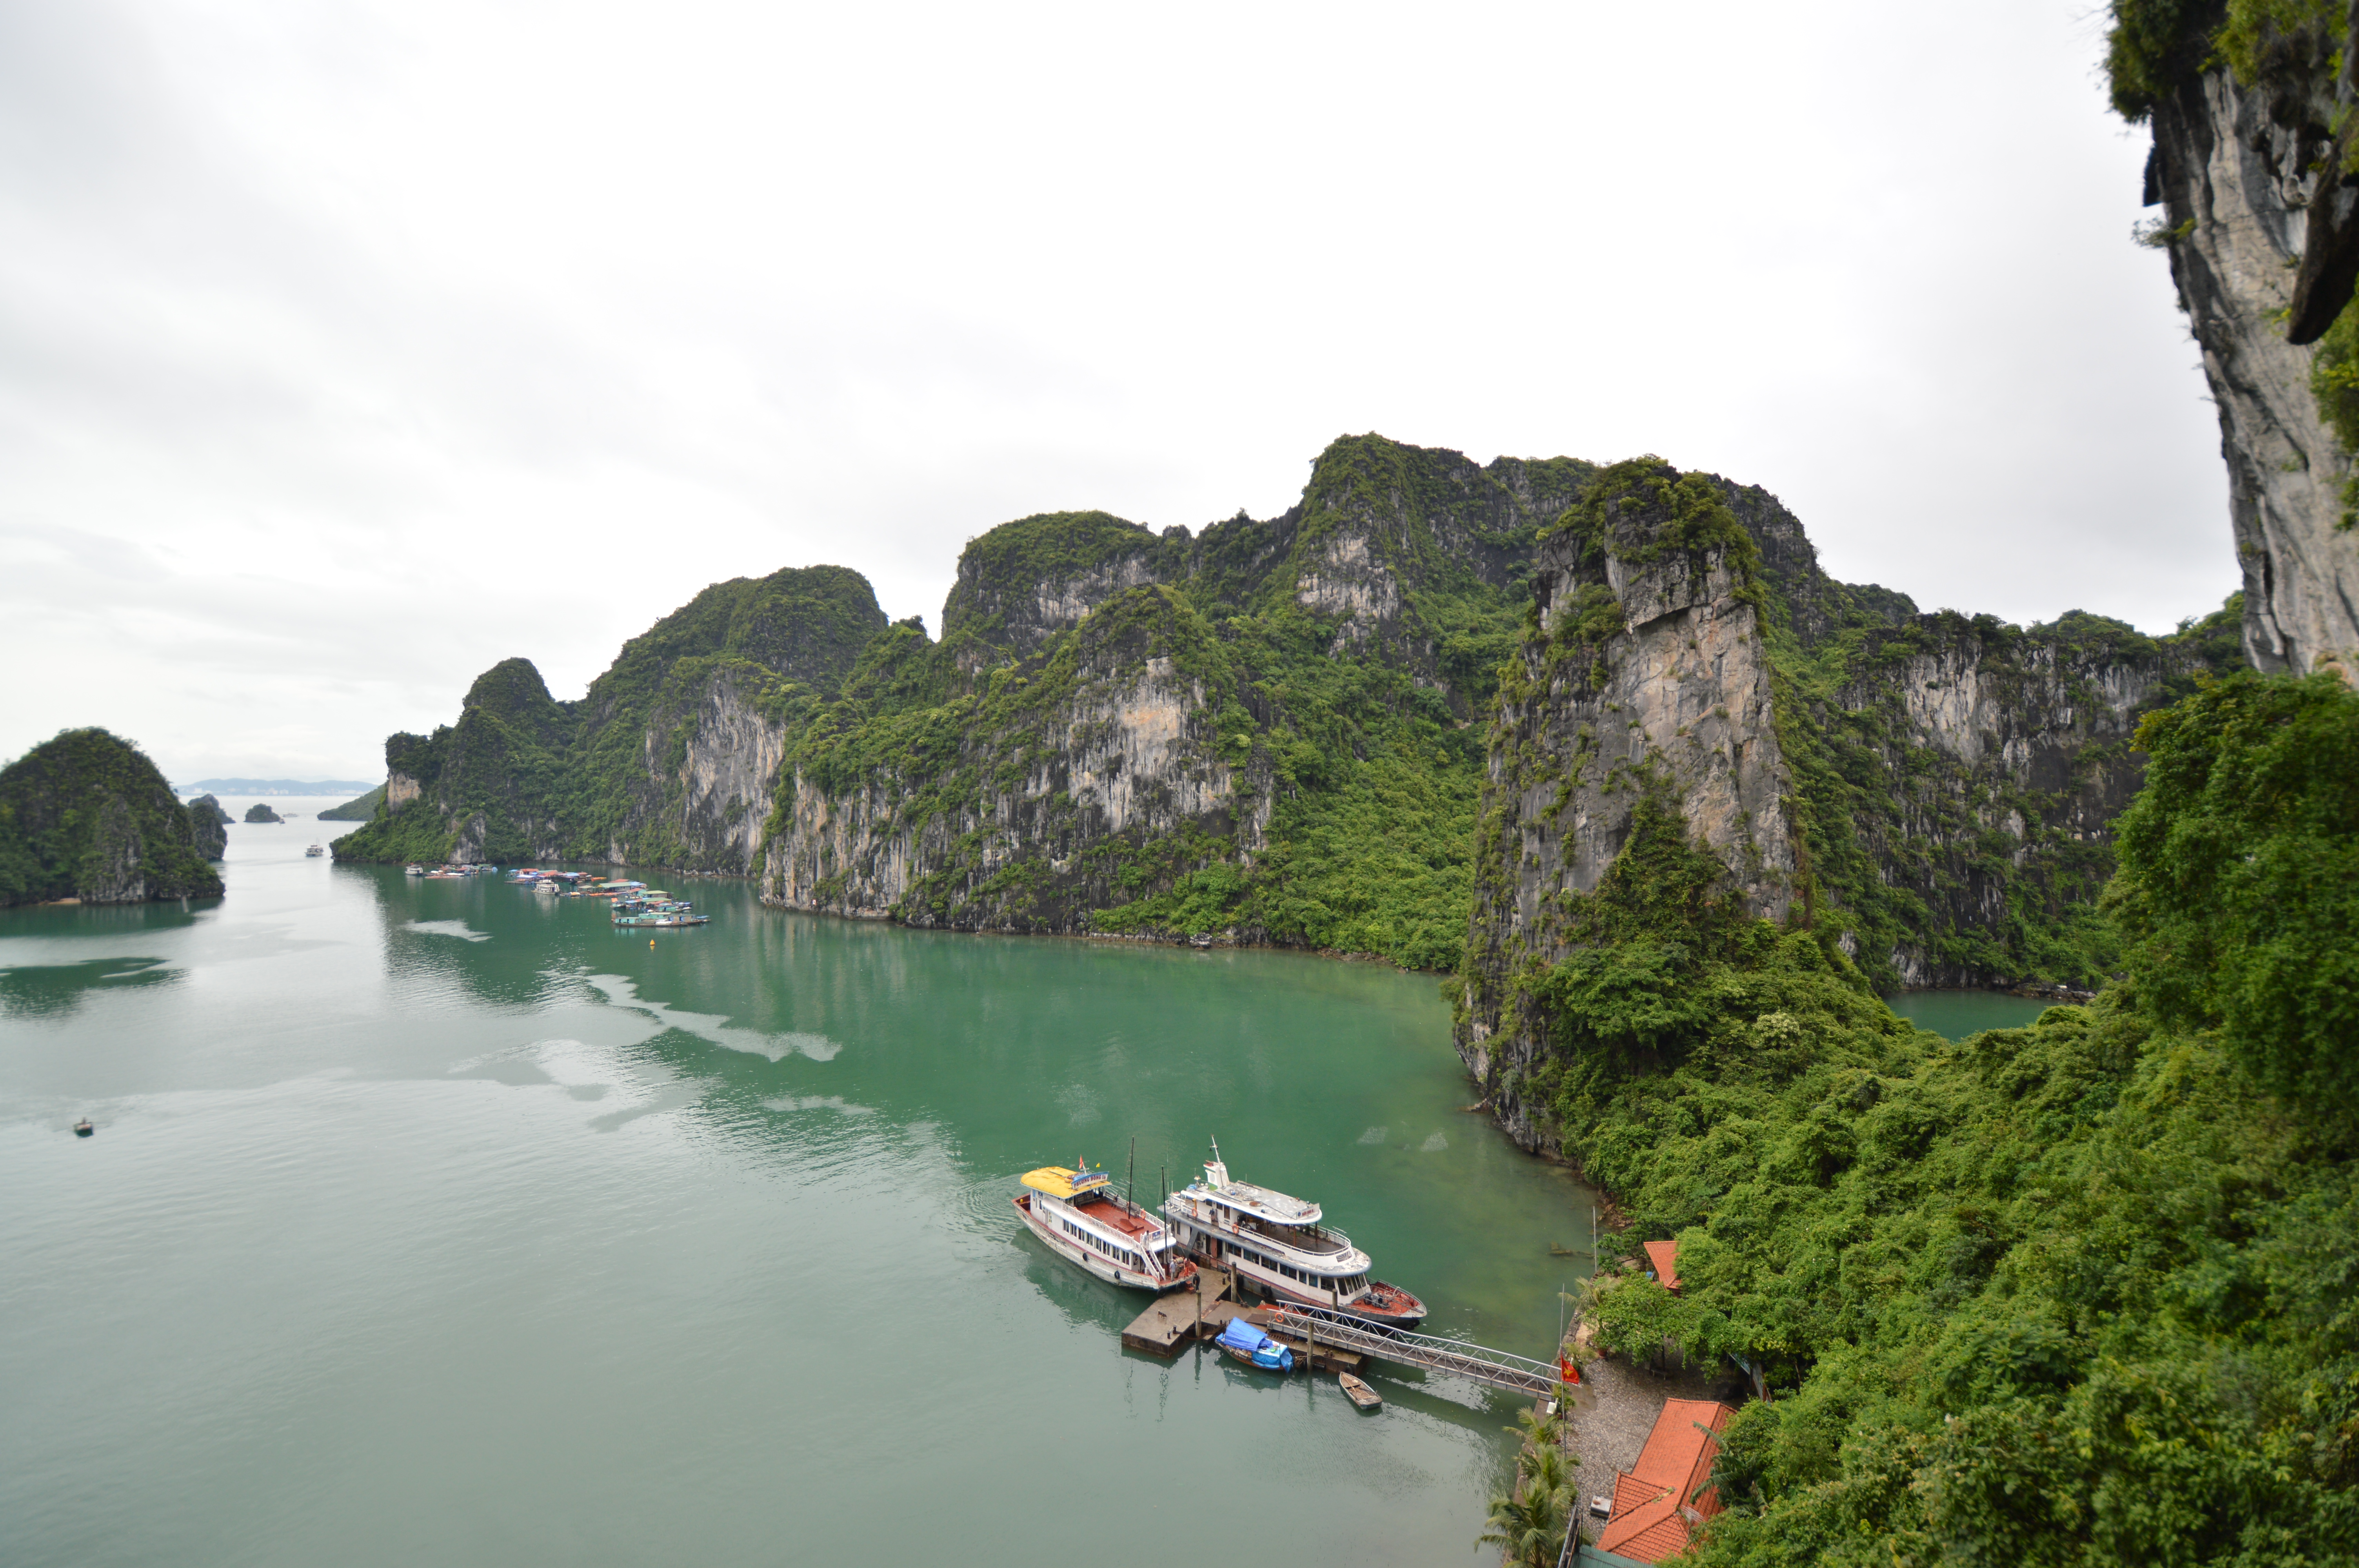 Second Prize (selected by votes at Business Admin display): This photo was taken in Ha Long Bay which is located in the North of Viet Nam. Ha Long Bay is a UNESCO World Heritage Site and officially recognized as one of the new Wonders of Nature. Photo submitted by Autumn Ta, ESL student at the UofR